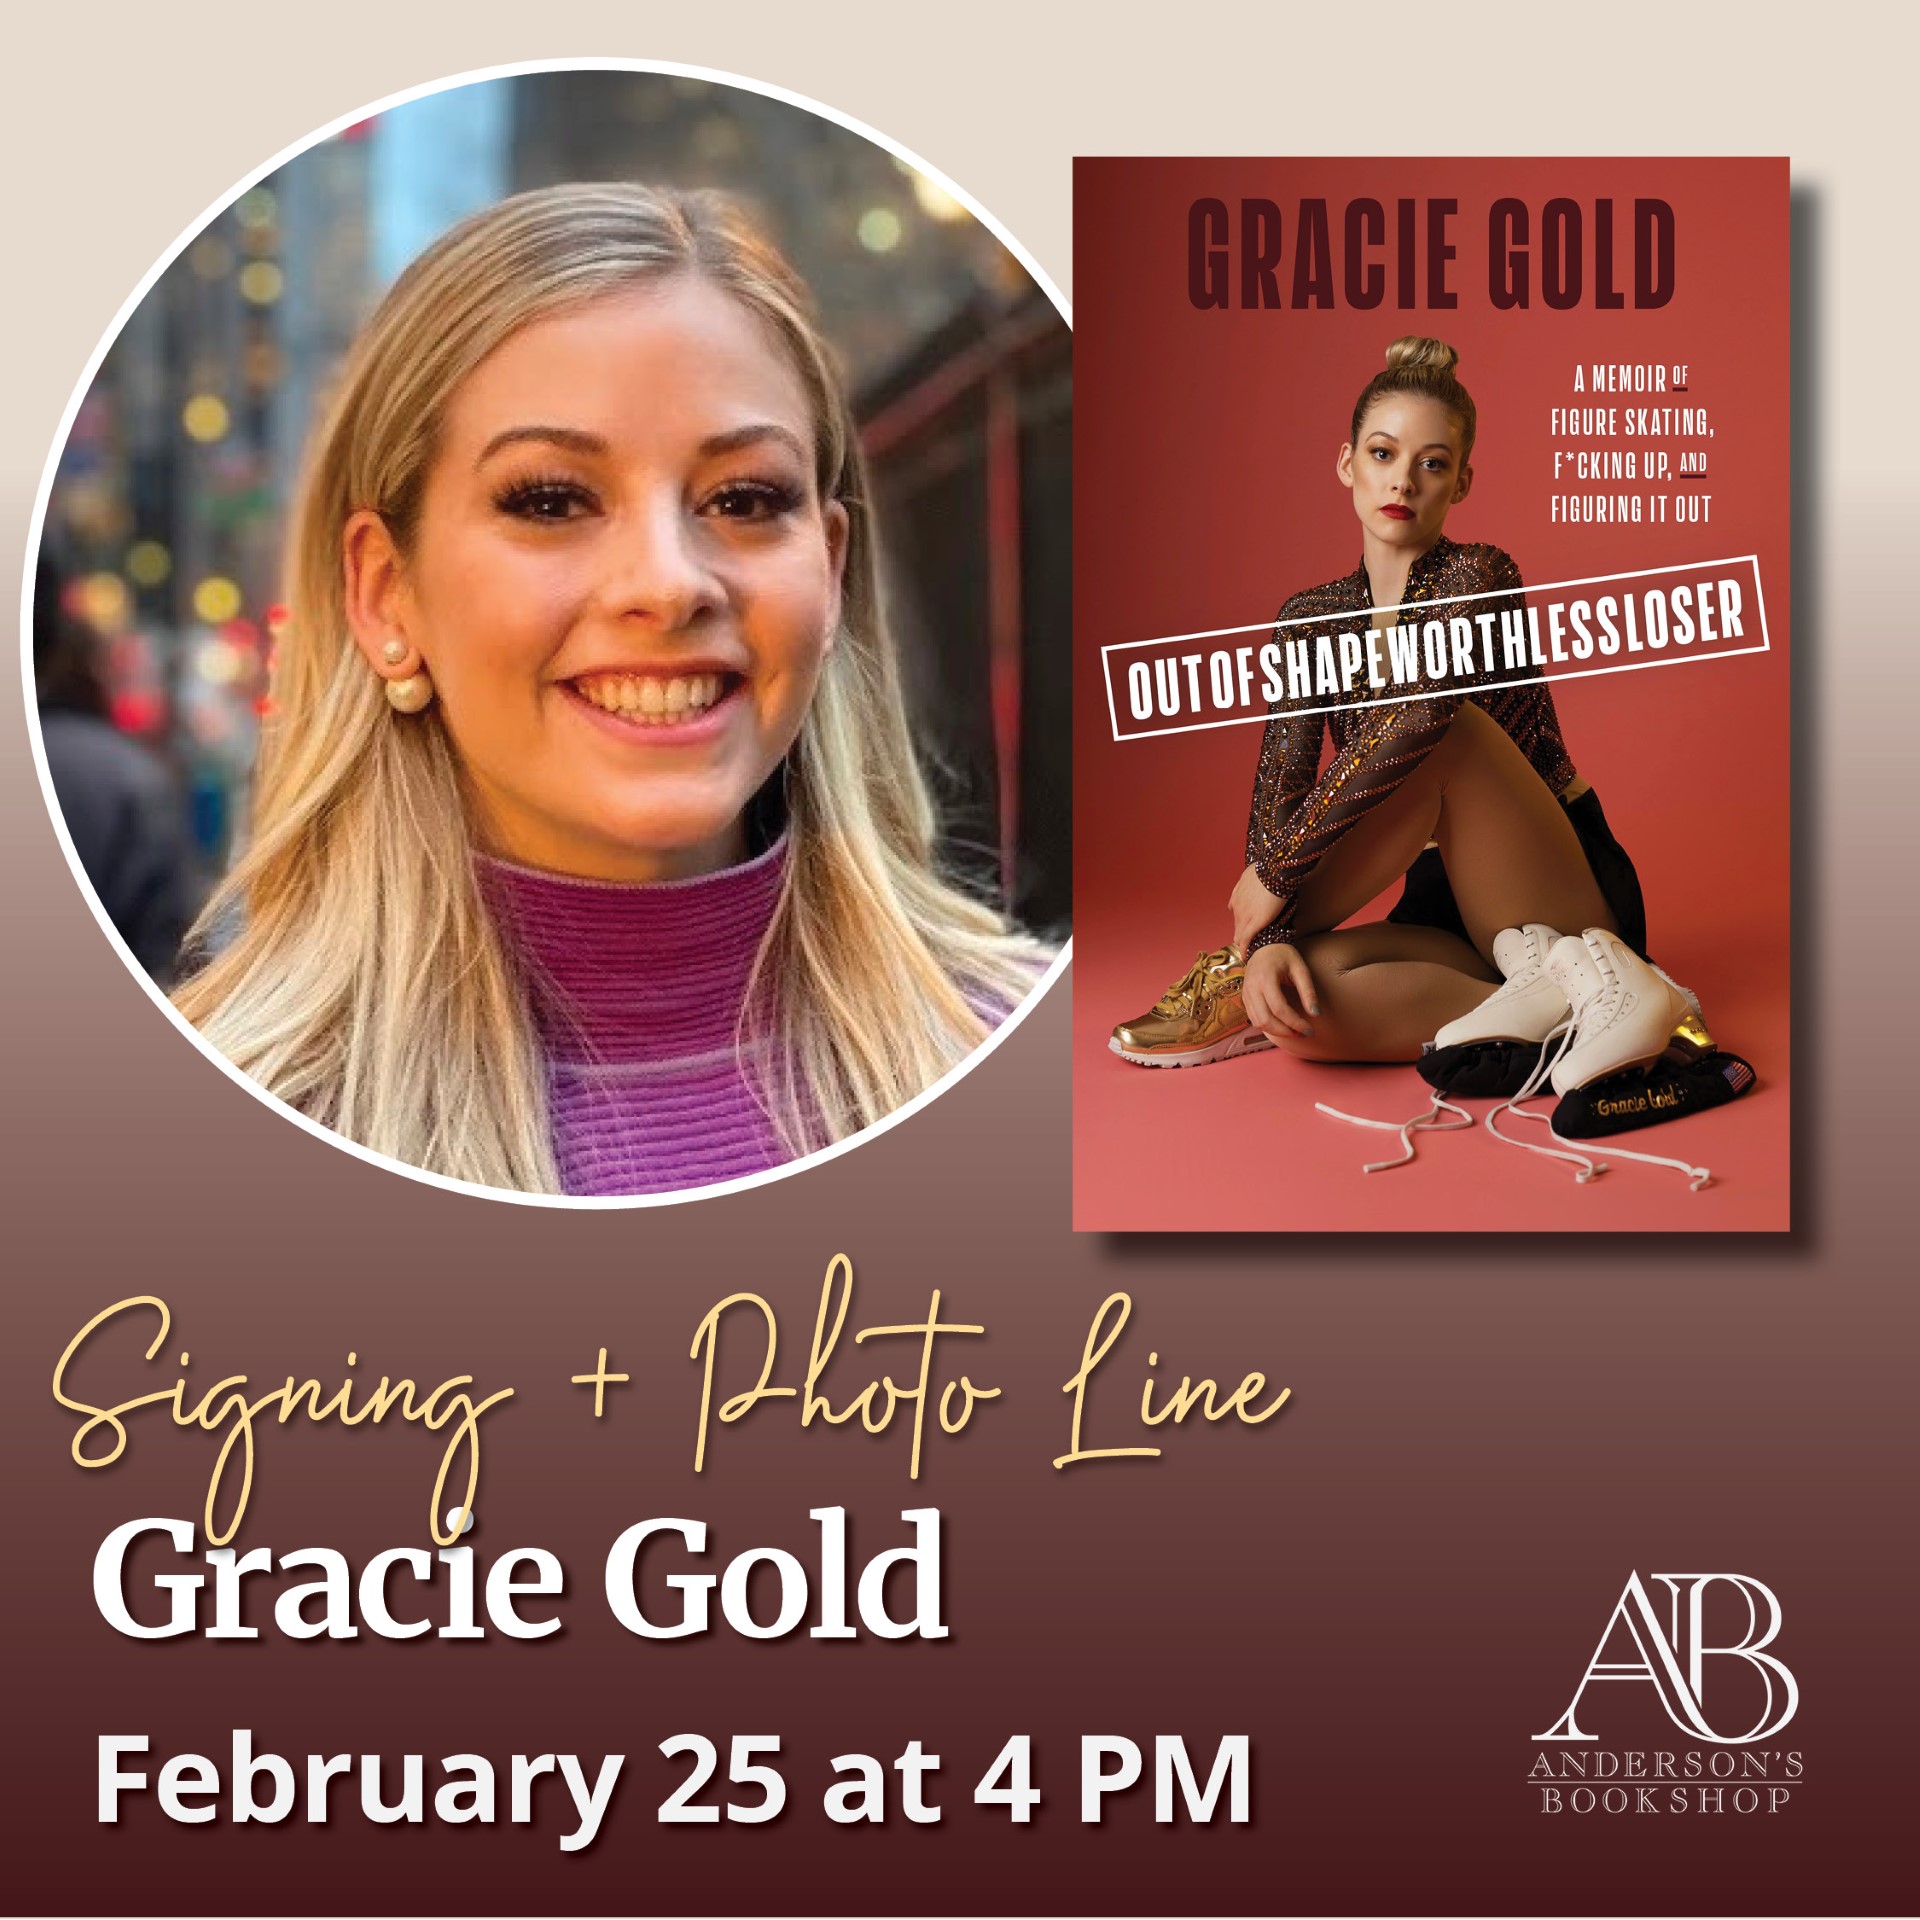 Signing Line with Gracie Gold/Outofshapeworthlessloser